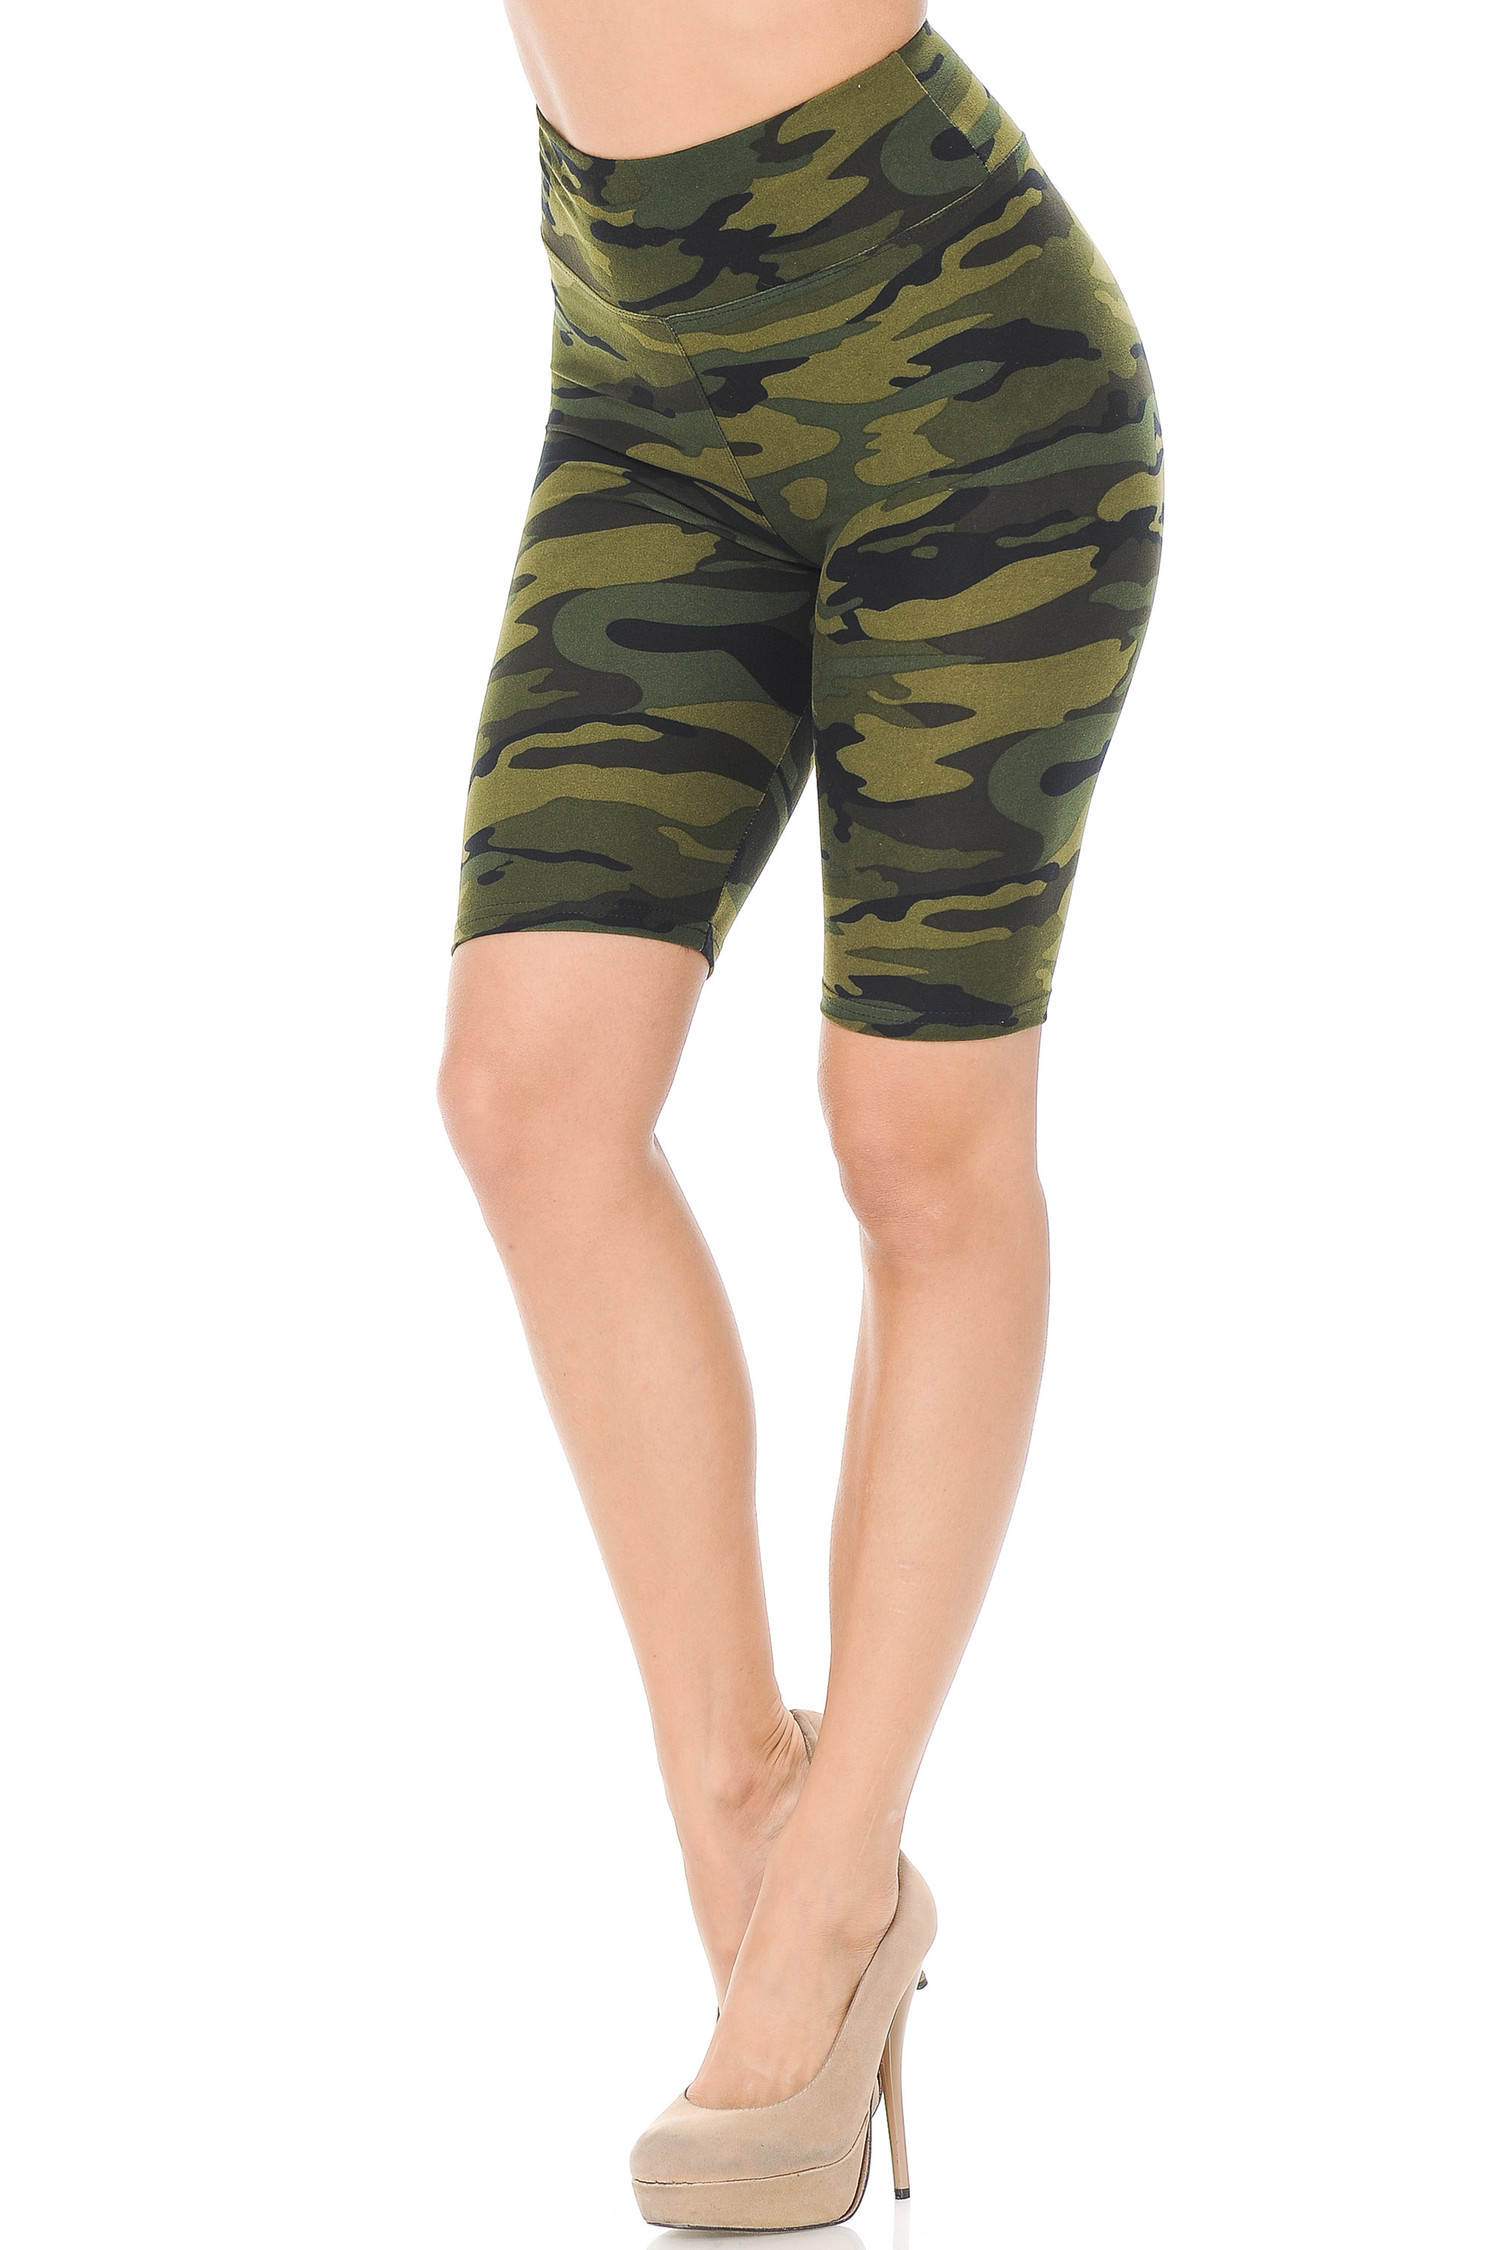 Buttery Soft Green Camouflage Plus Size Shorts - 3 Inch Waist Band | Fashion